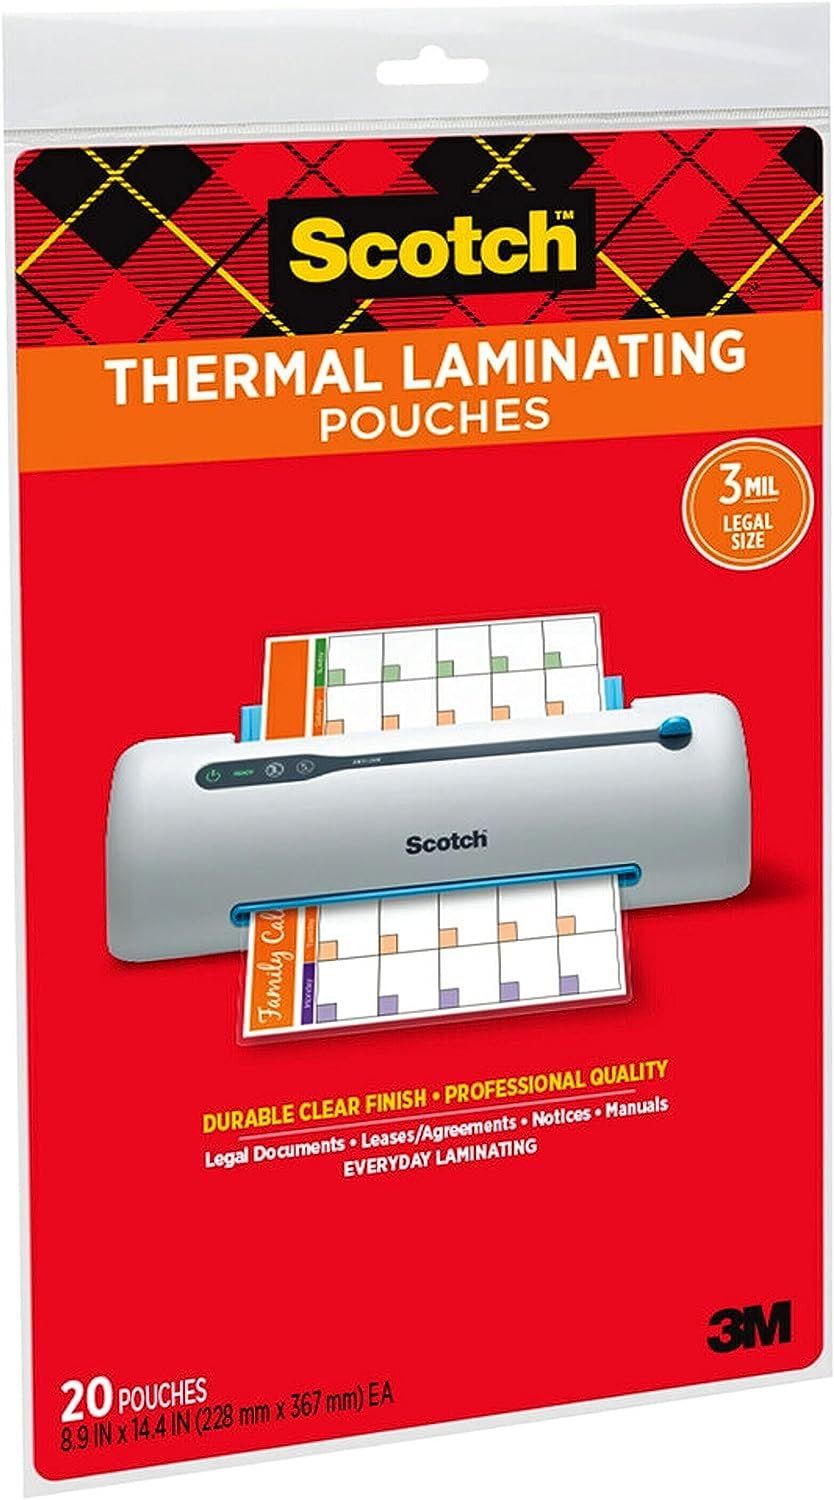 Scotch Brand Thermal Laminating Pouches, 8.9 x 14.4-Inches, Legal Size, 20-Pack (TP3855-20)